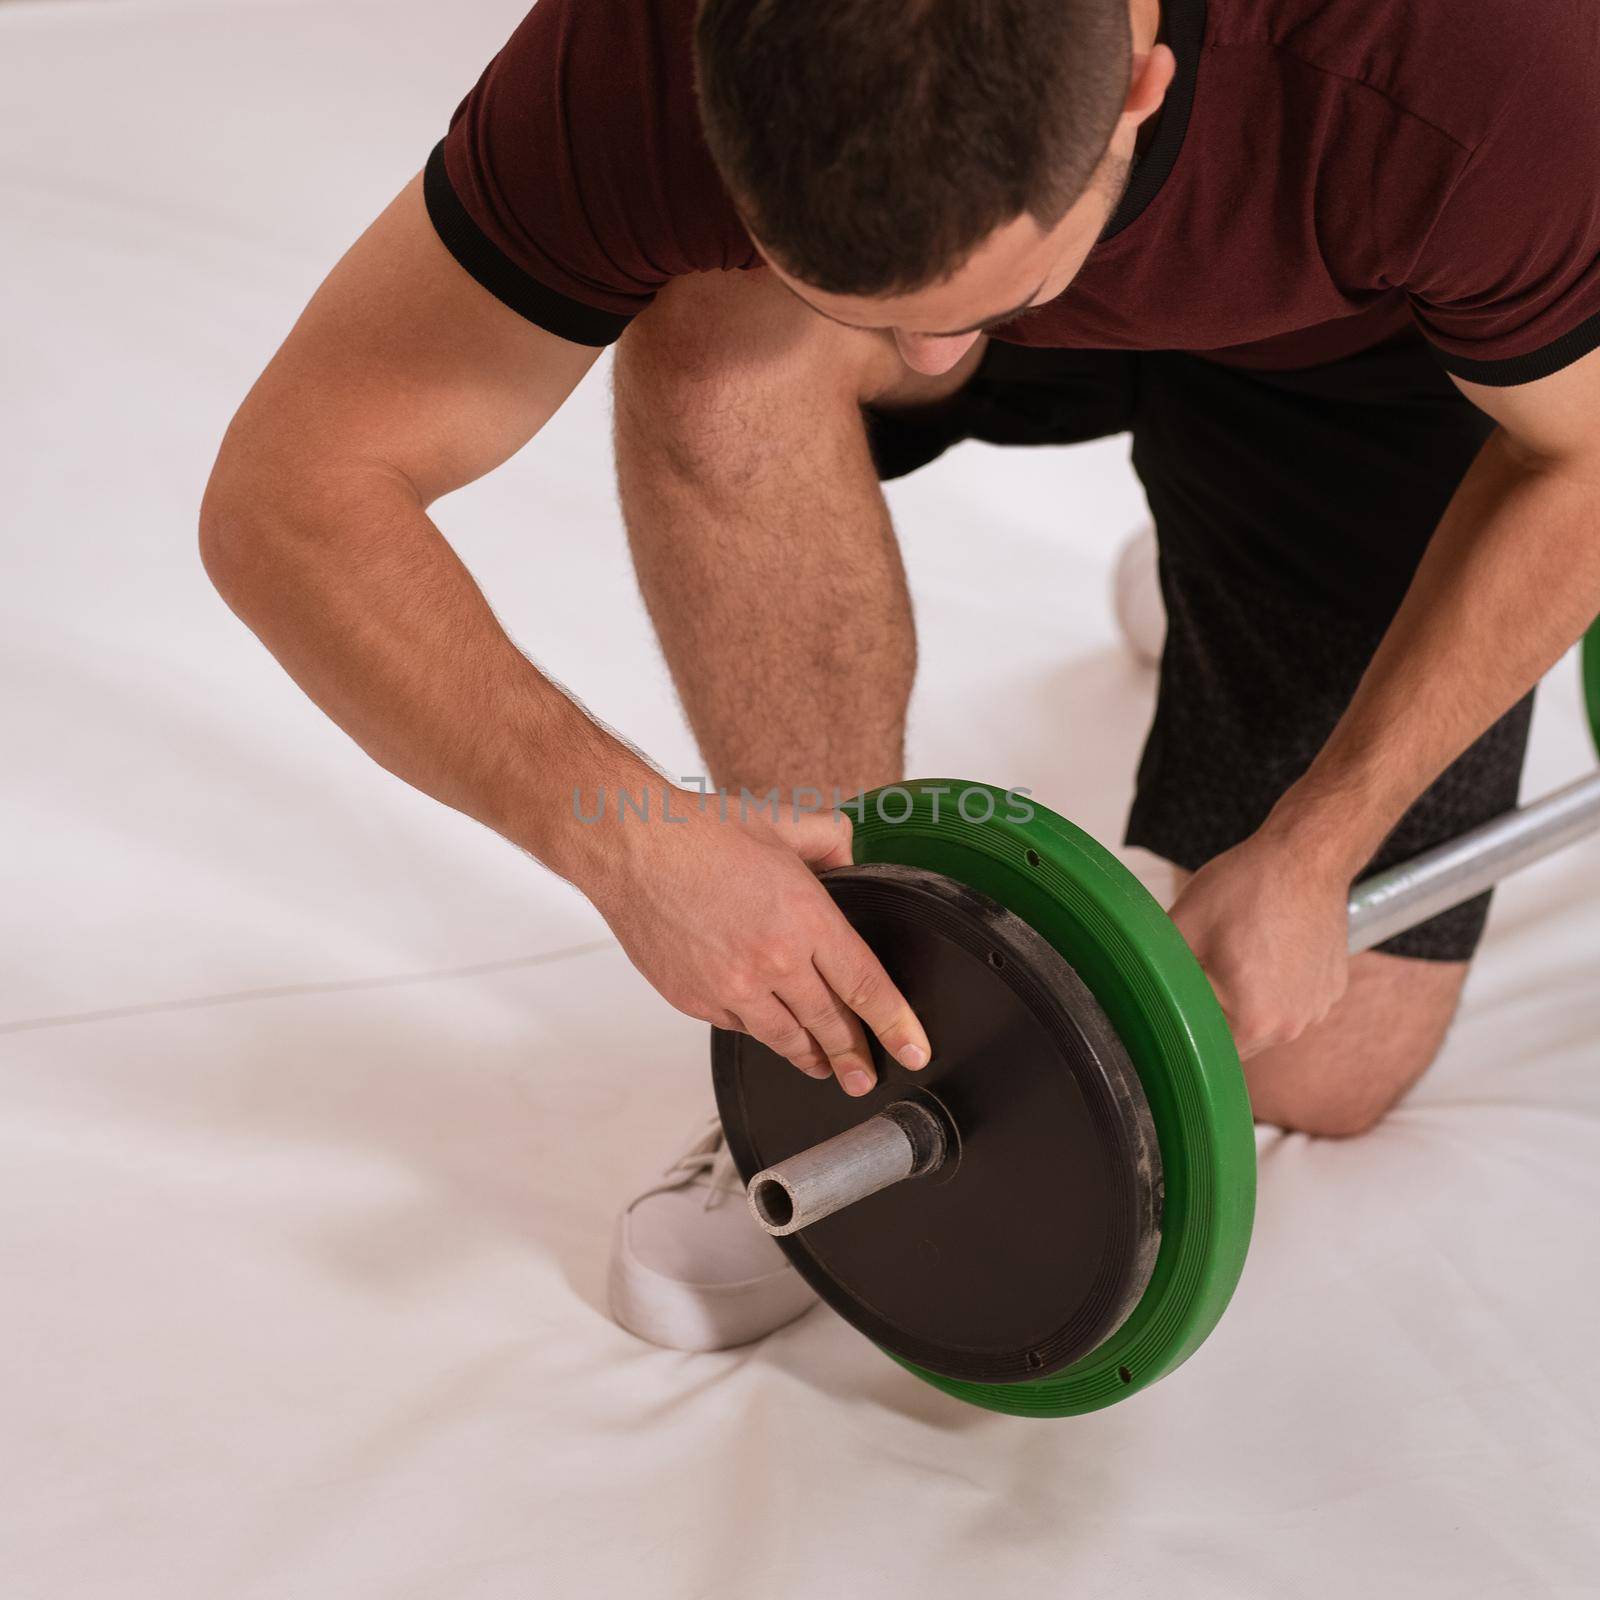 Adding weight to a barbell young man bow on a knee changing black and green plates, equipment for weight training concept. Sports equipment for training. square cropped by LipikStockMedia